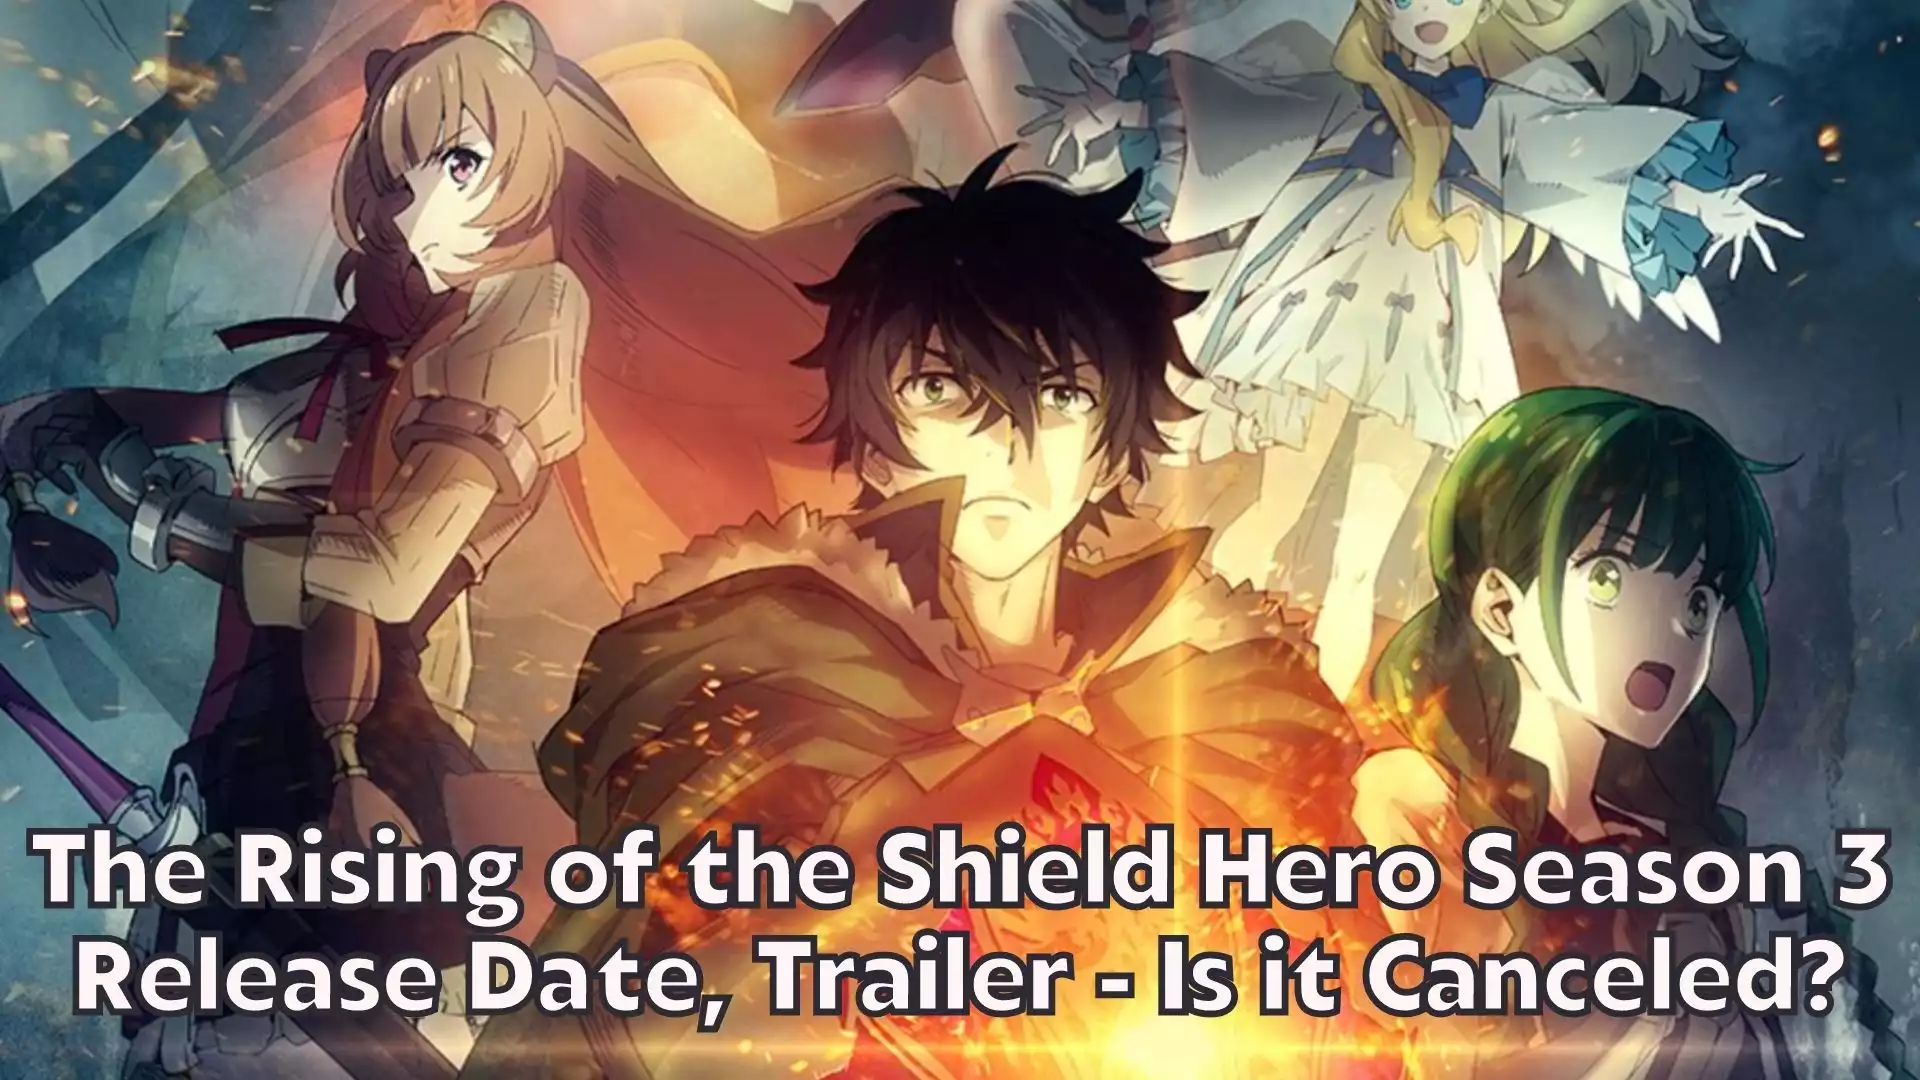 The Rising of the Shield Hero Season 3 Release Date, Trailer - Is it Canceled?